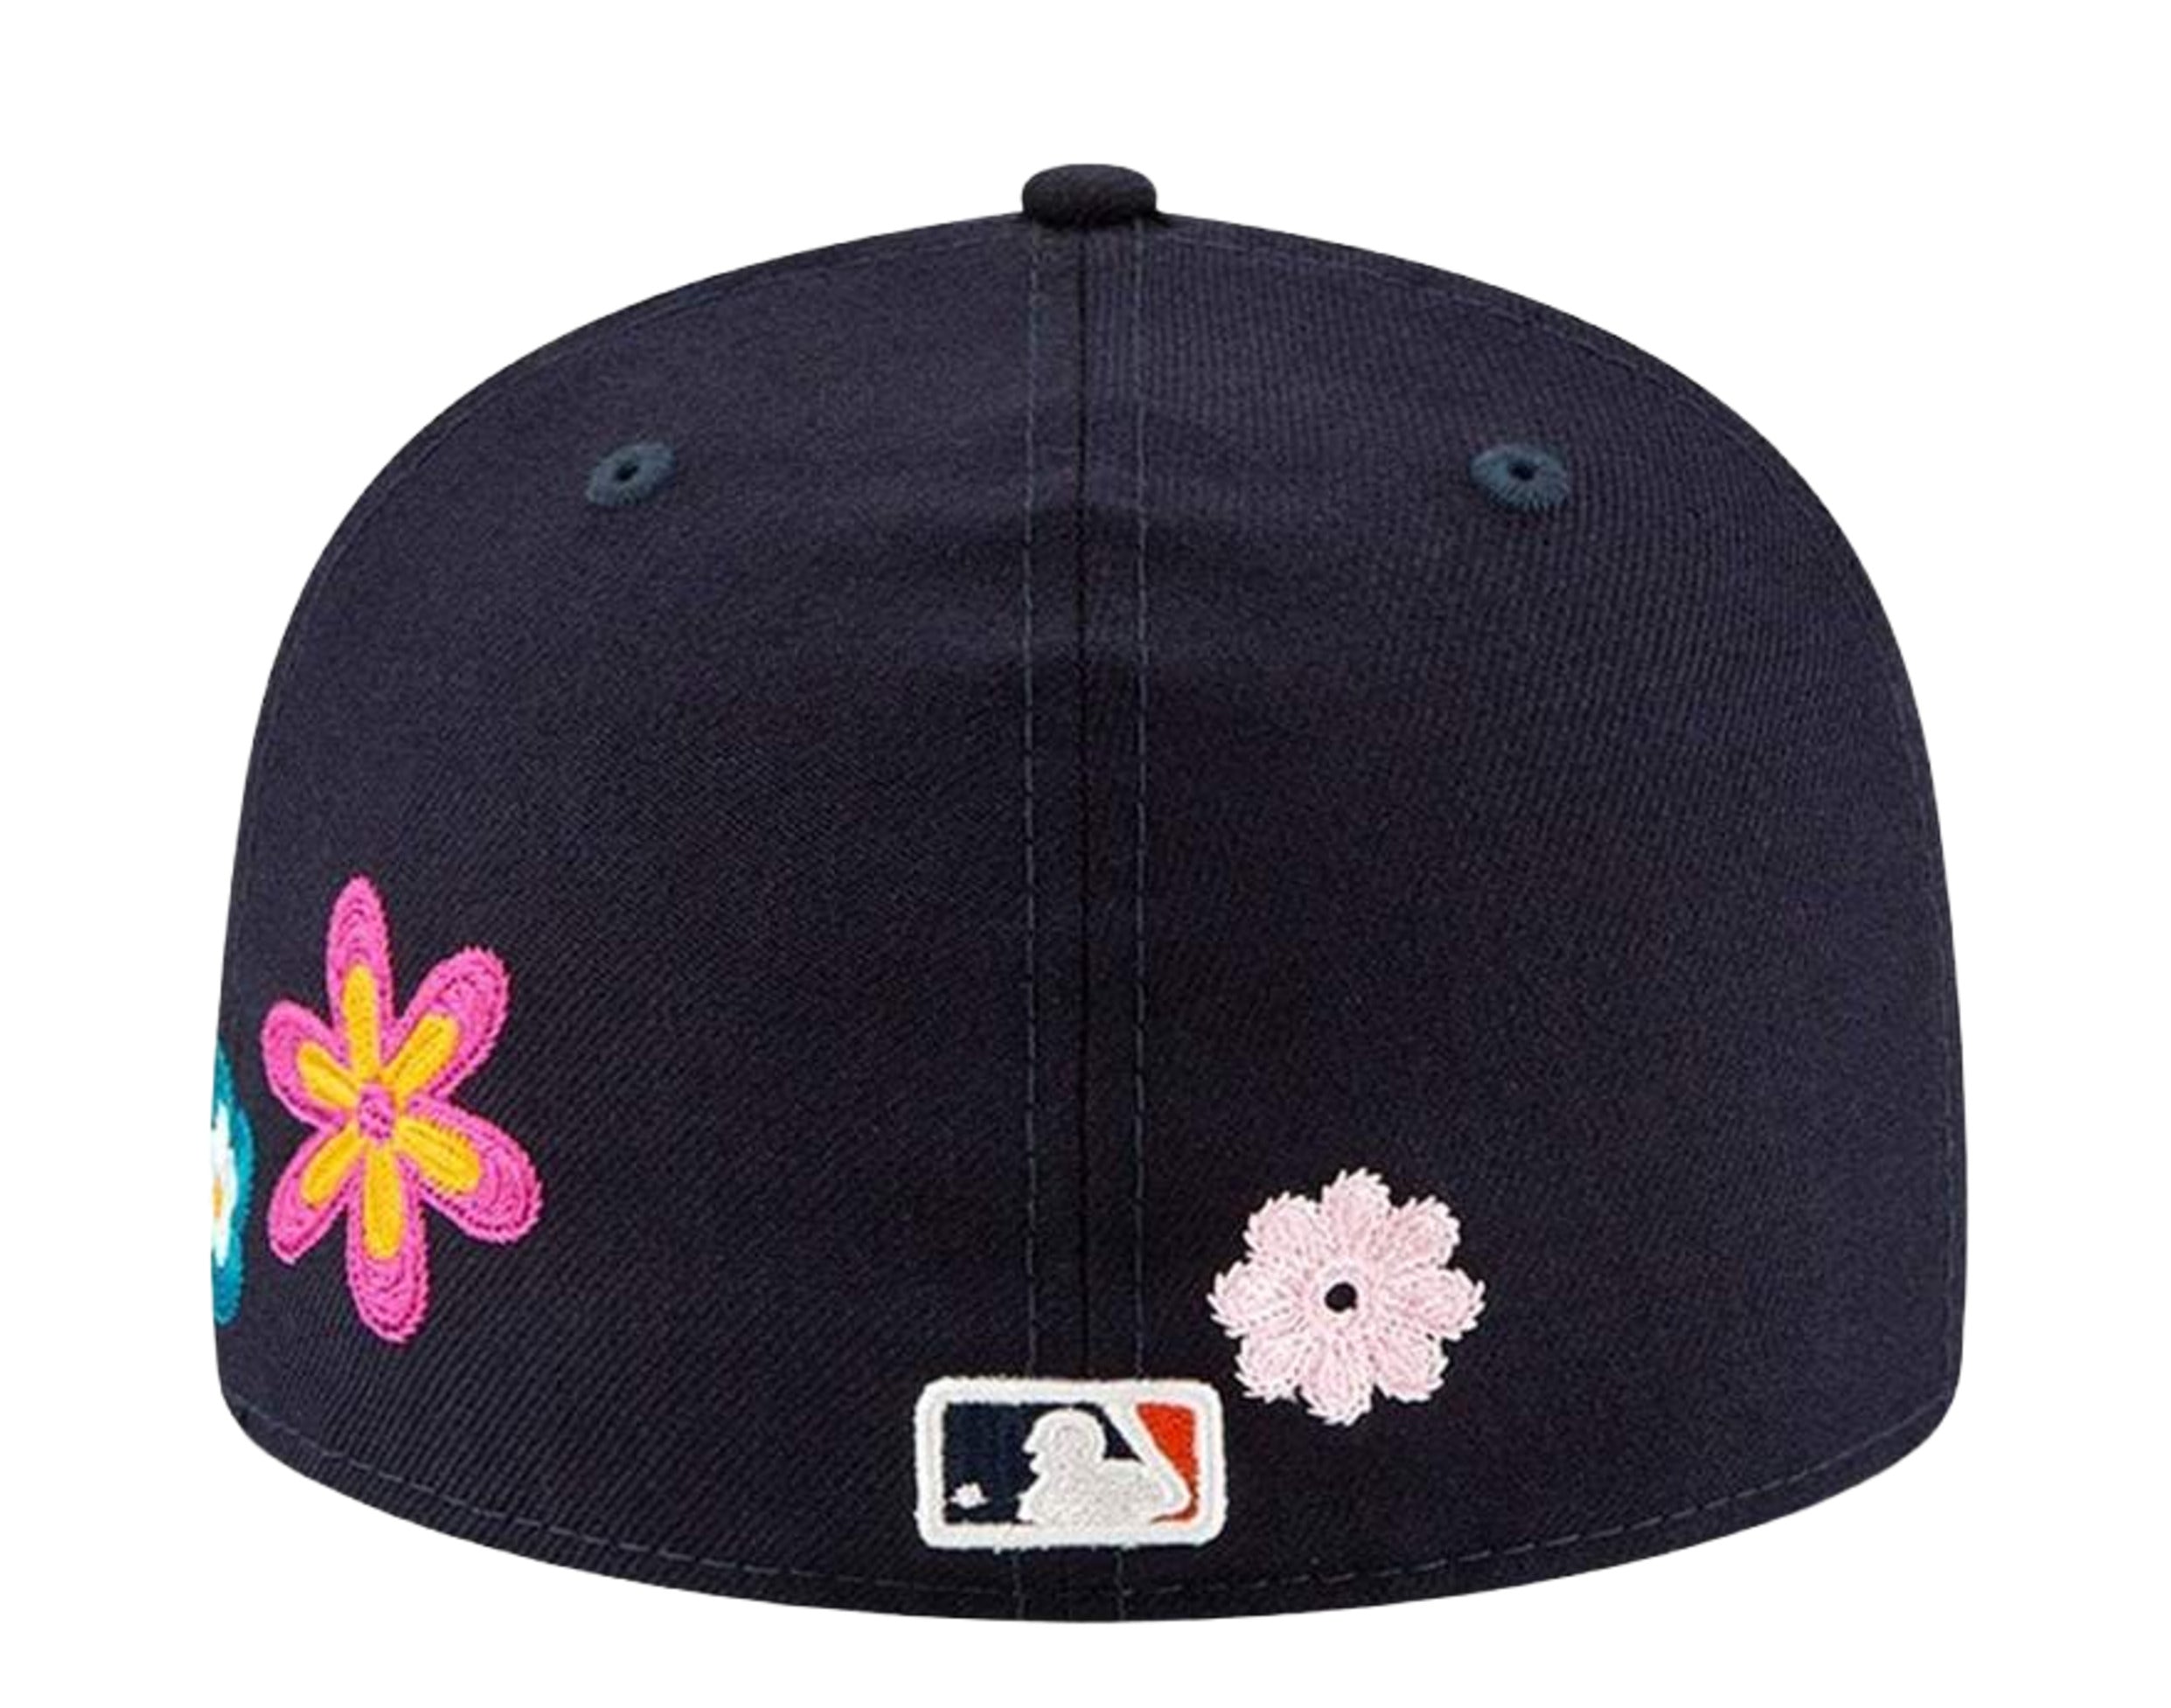 Floral Series 59FIFTY Fitted - Detroit Tigers – Feature